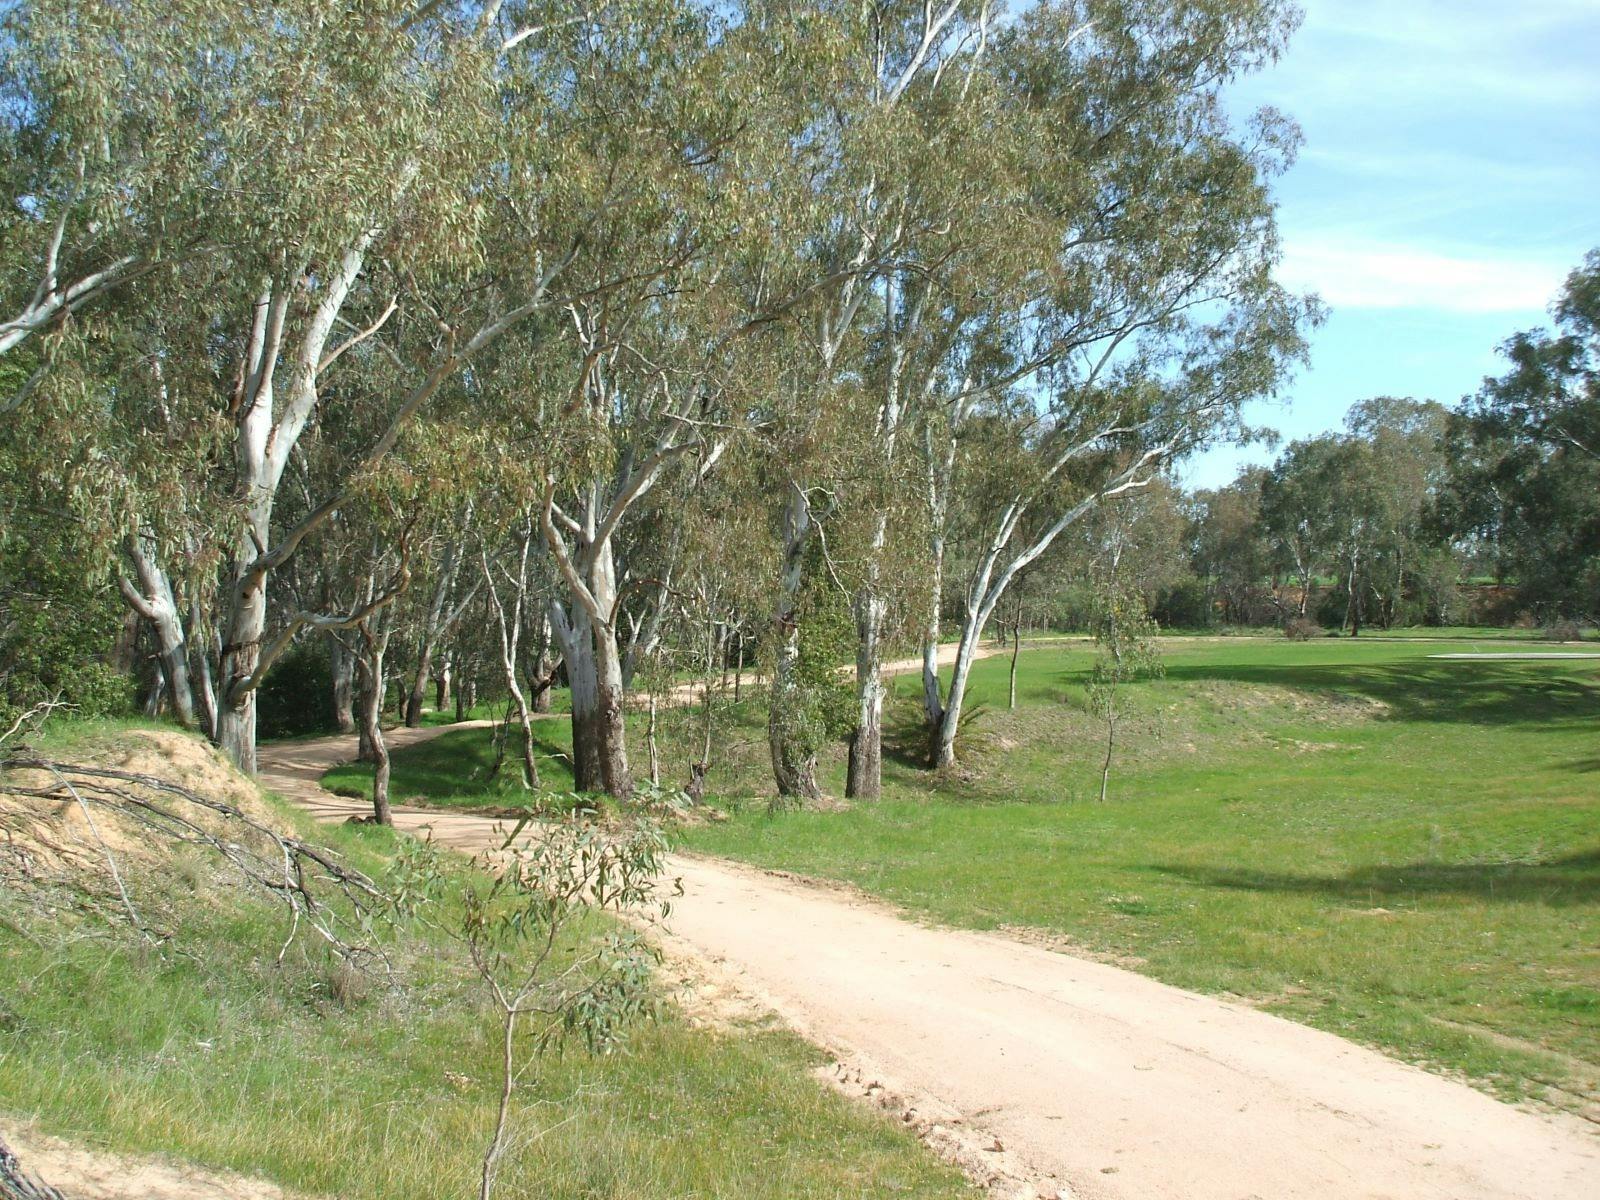 Culcairn bike track winding around gum trees with the Culcairn Golf Course green on the right.